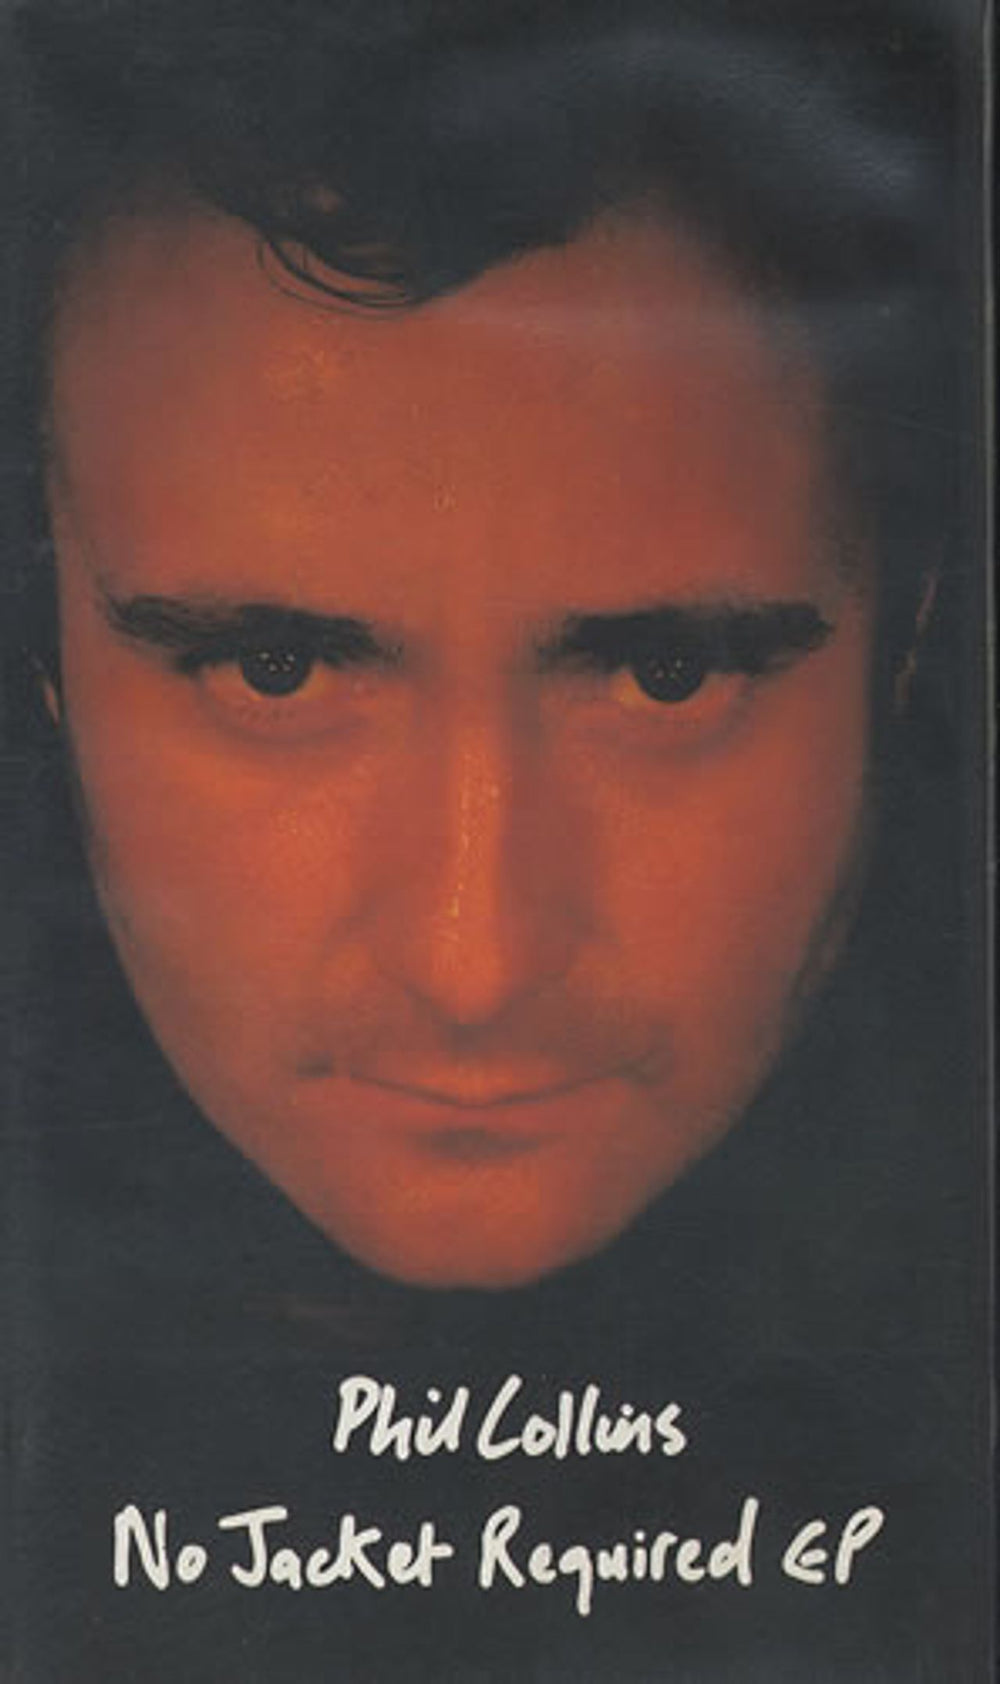 Phil Collins No Jacket Required EP UK video (VHS or PAL or NTSC) VVC095